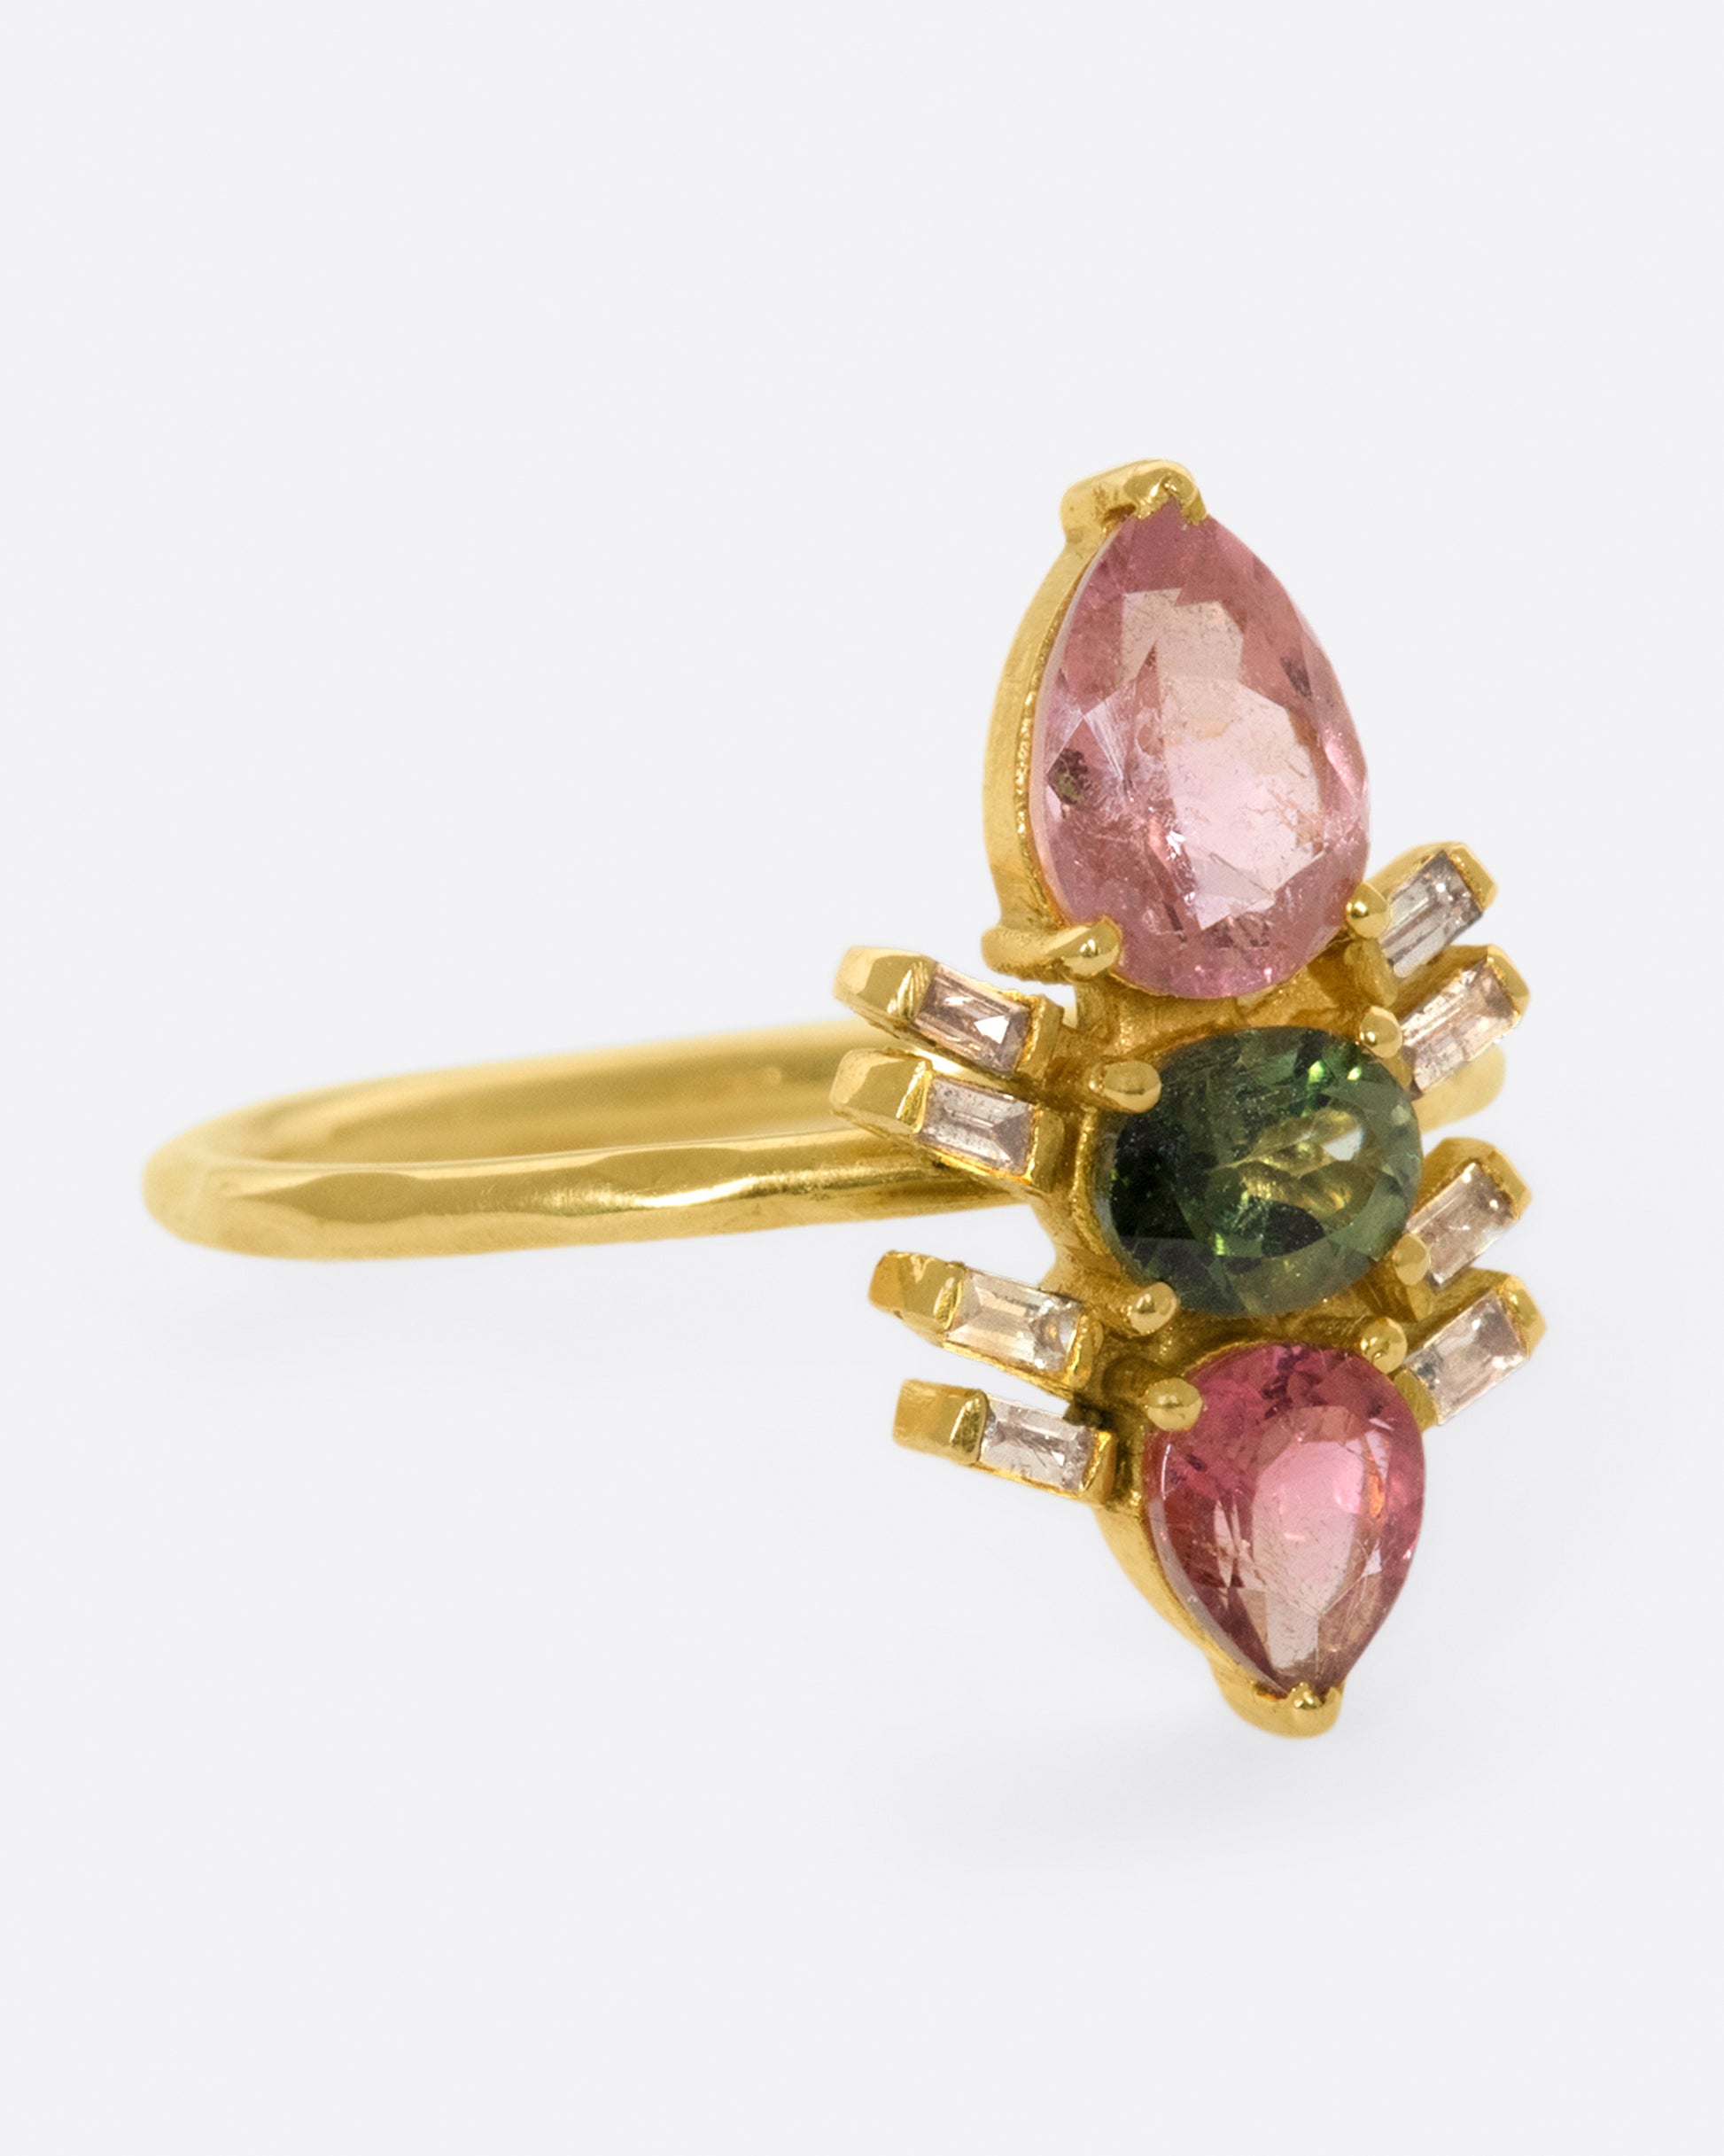 A garden-inspired pink and green tourmaline ring with baguette accents